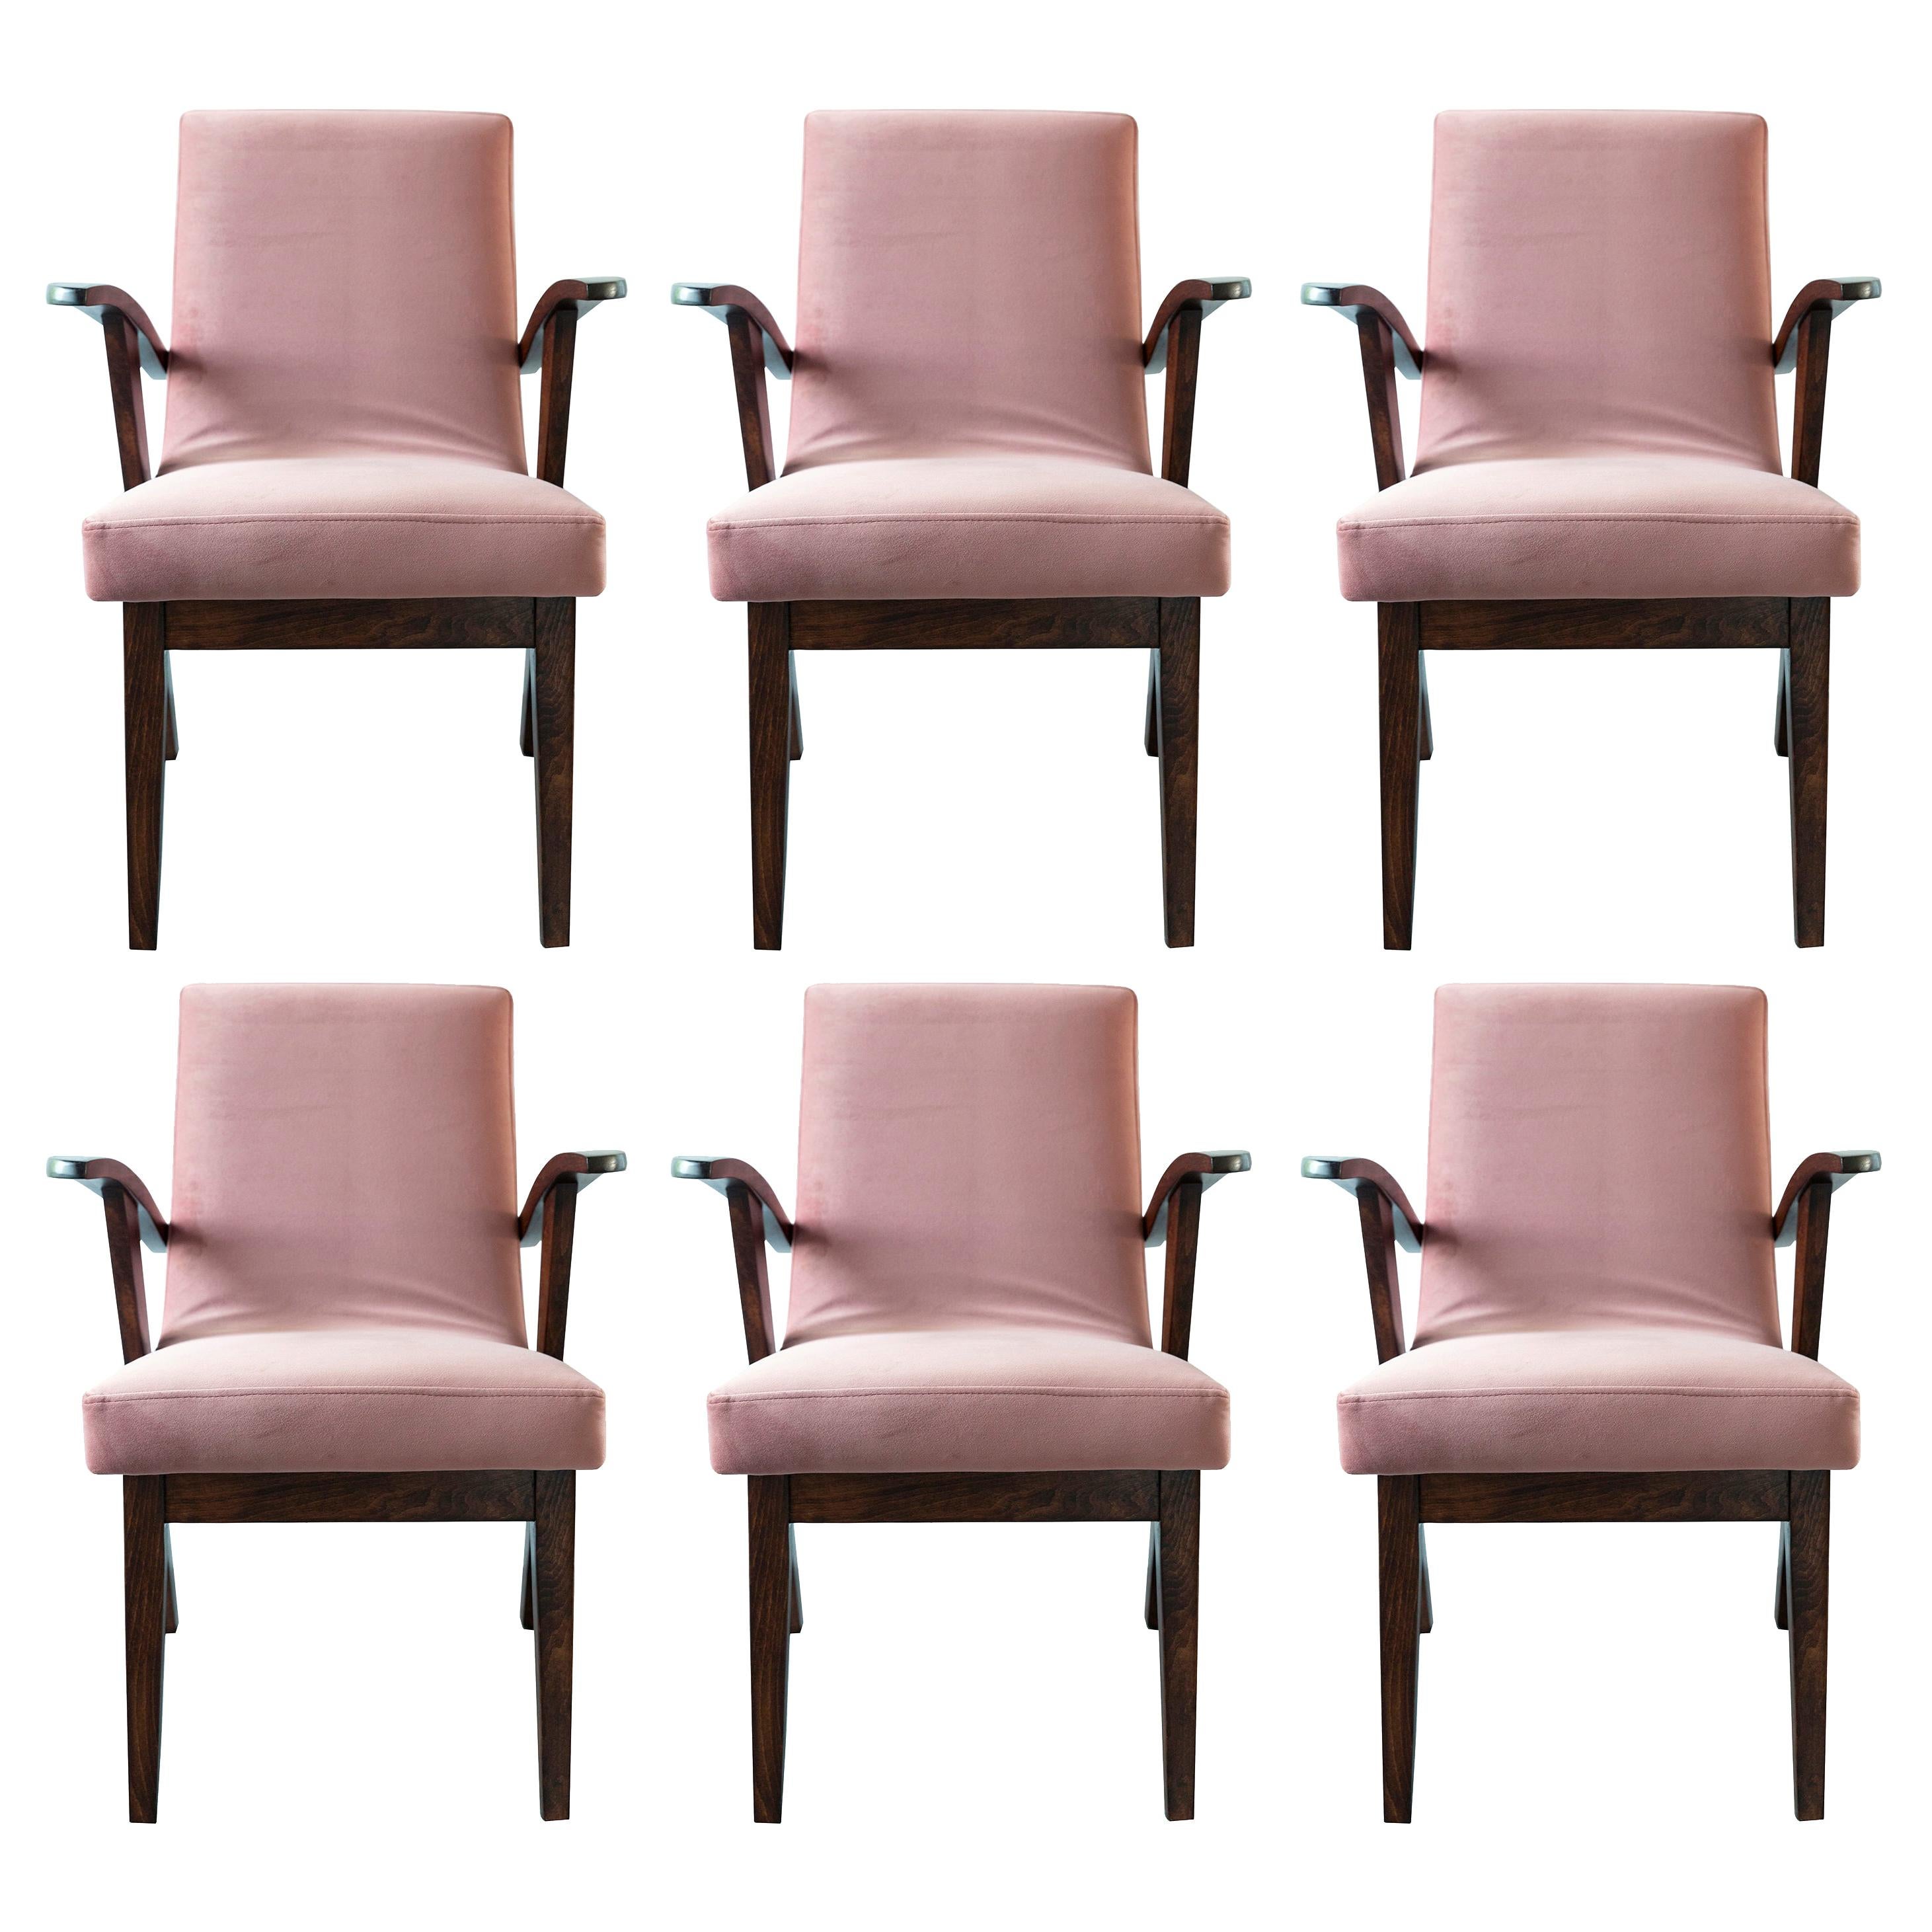 Six 20th Century Armchairs in Dusty Pink Velvet by Mieczyslaw Puchala, 1960s